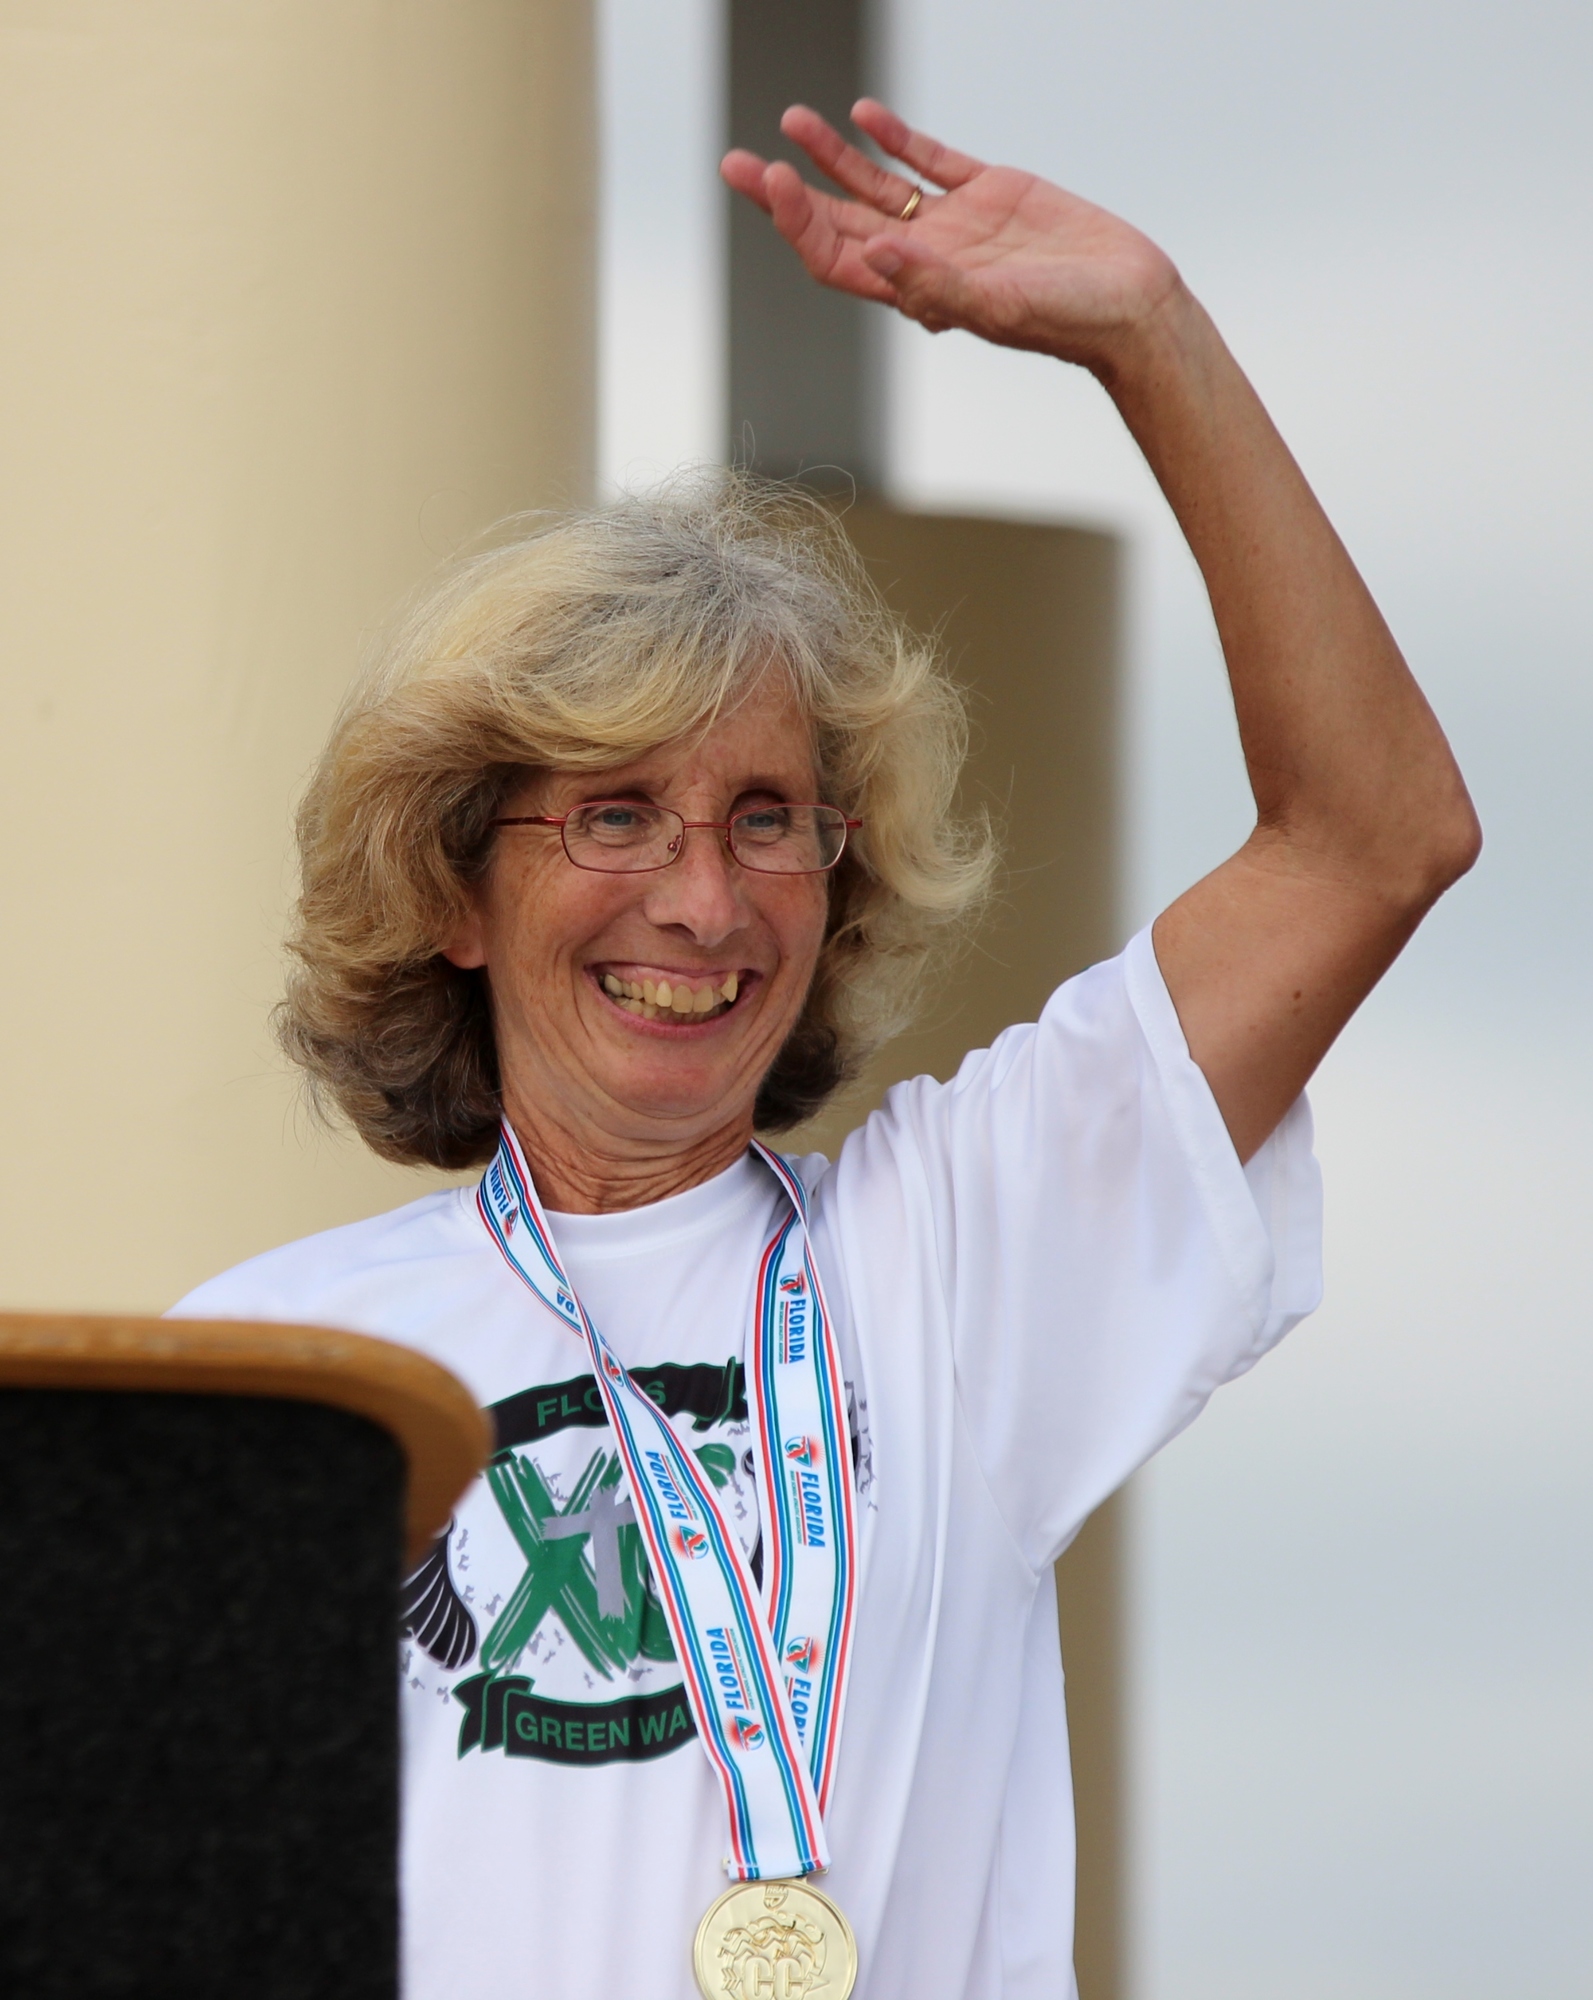 Coach Sue O'Malley becomes just the third woman to lead a boys' team to a state title.